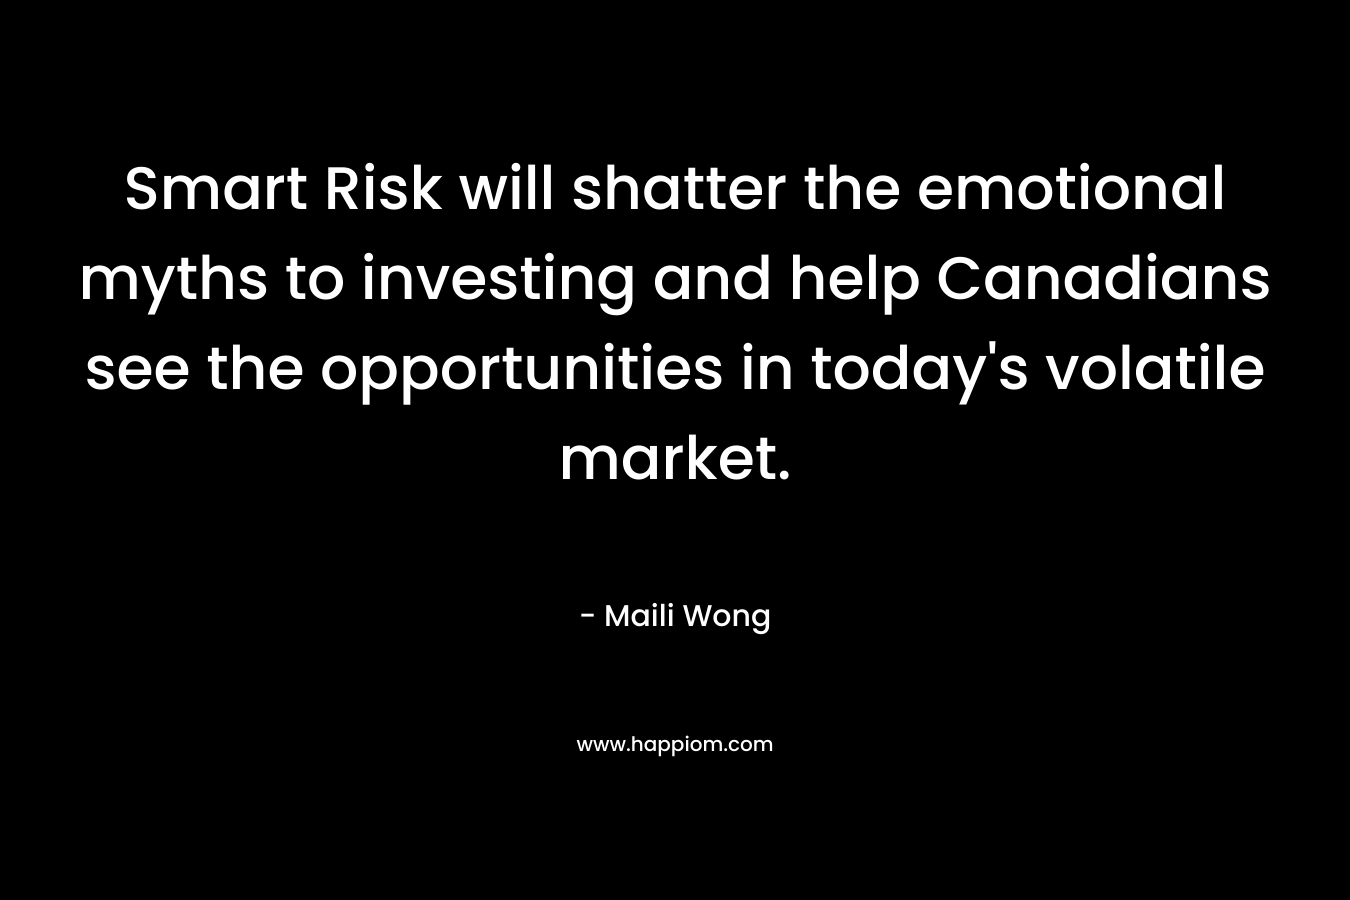 Smart Risk will shatter the emotional myths to investing and help Canadians see the opportunities in today's volatile market.